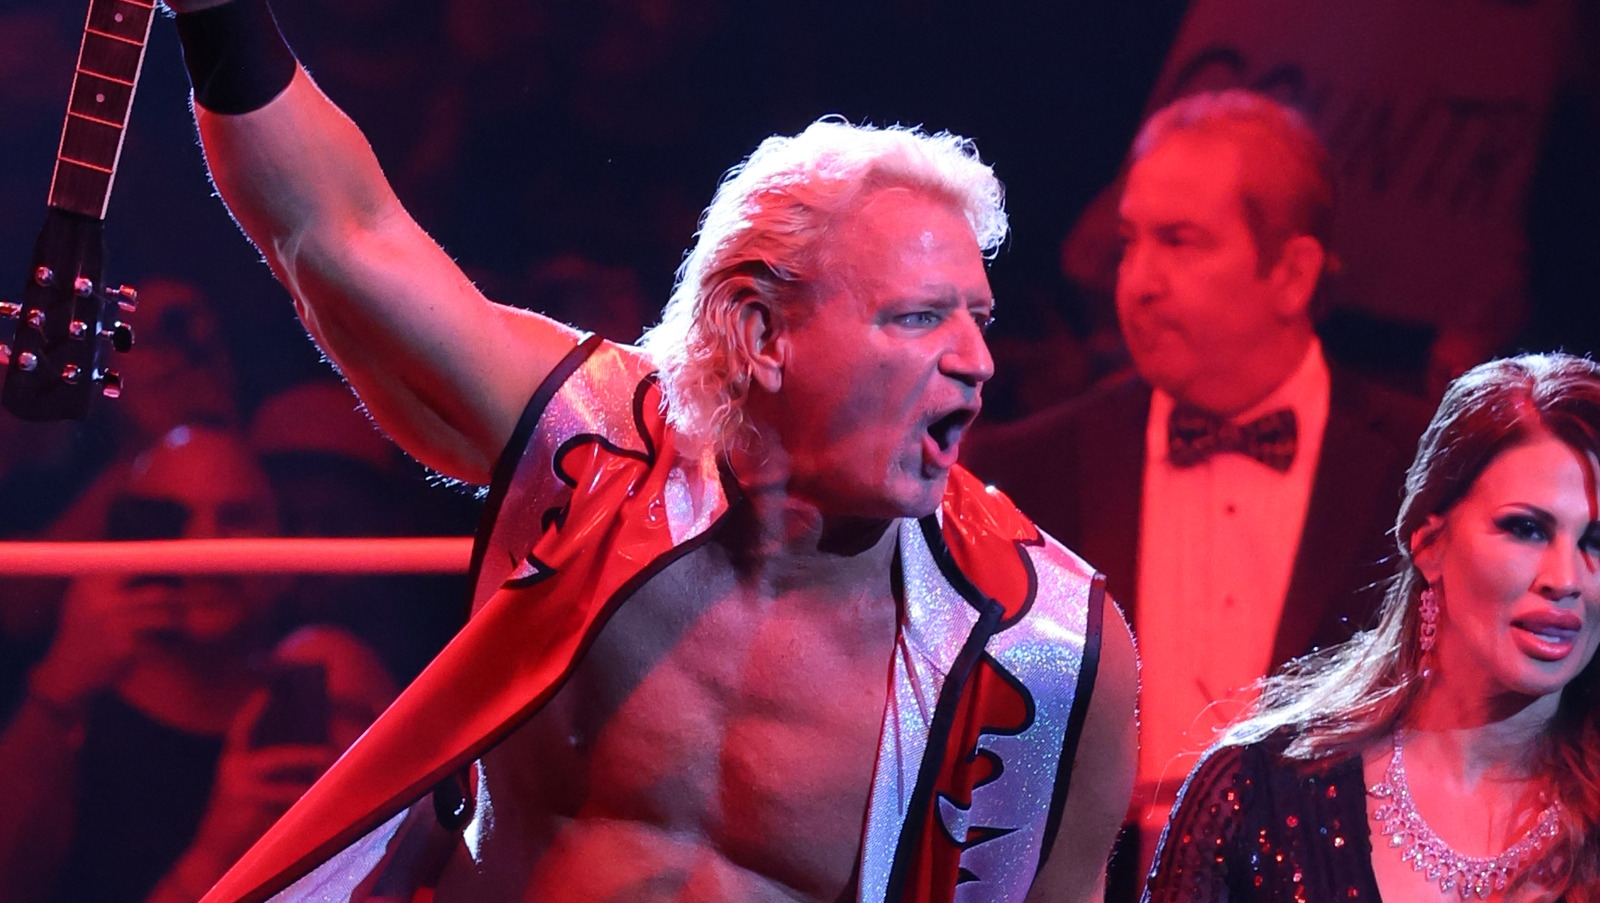 Jeff Jarrett's Father Saw Big Things In This WWE Hall Of Famer